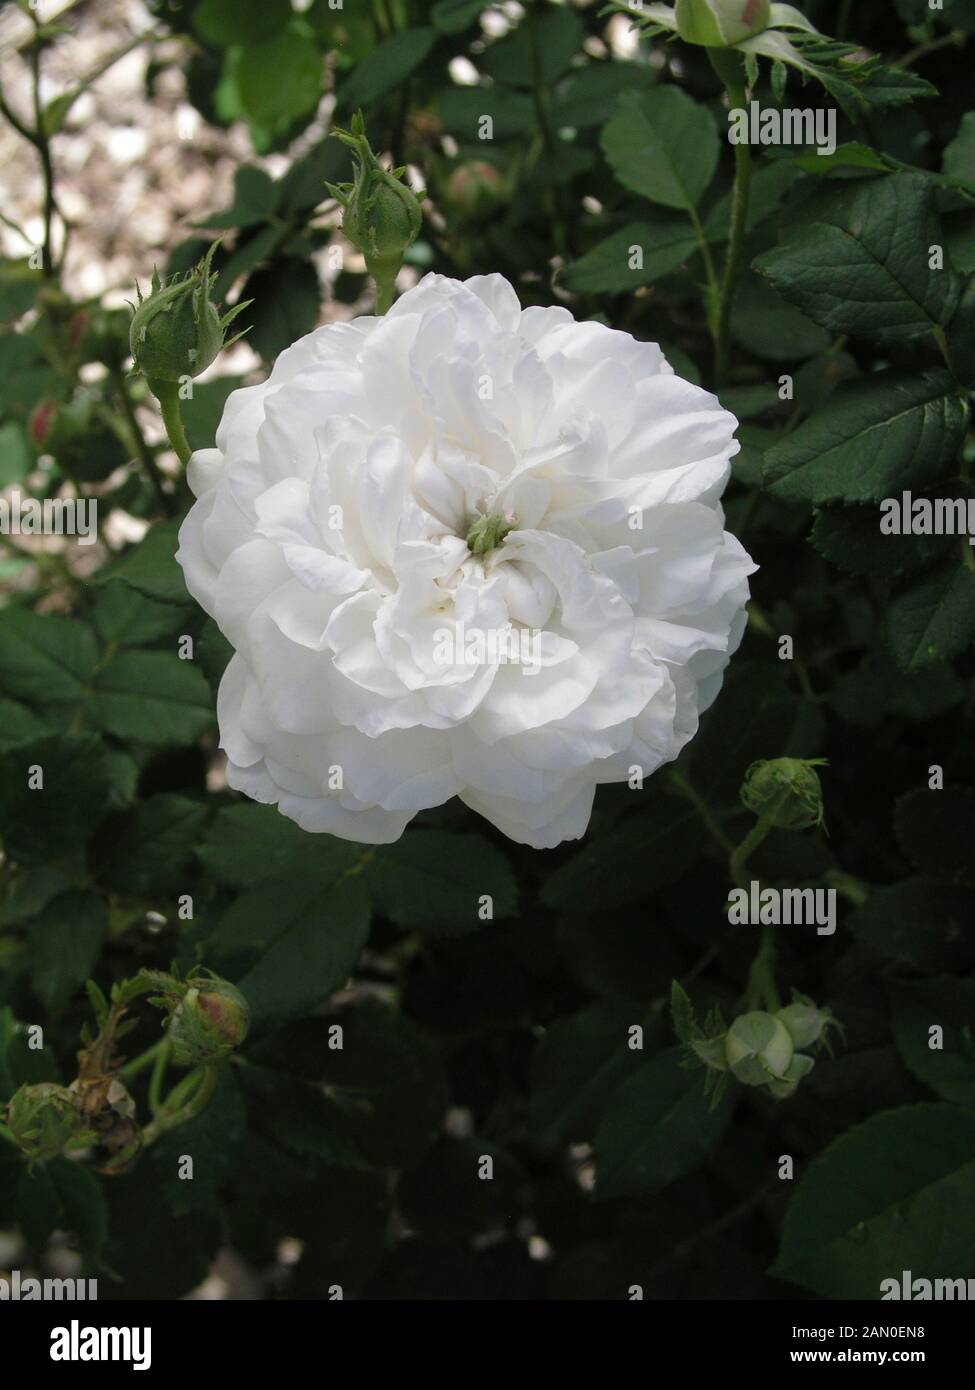 ROSA 'MADAME PLANTIER'  (SYN. ROSA 'THE BRIDE'S ROSE') Stock Photo